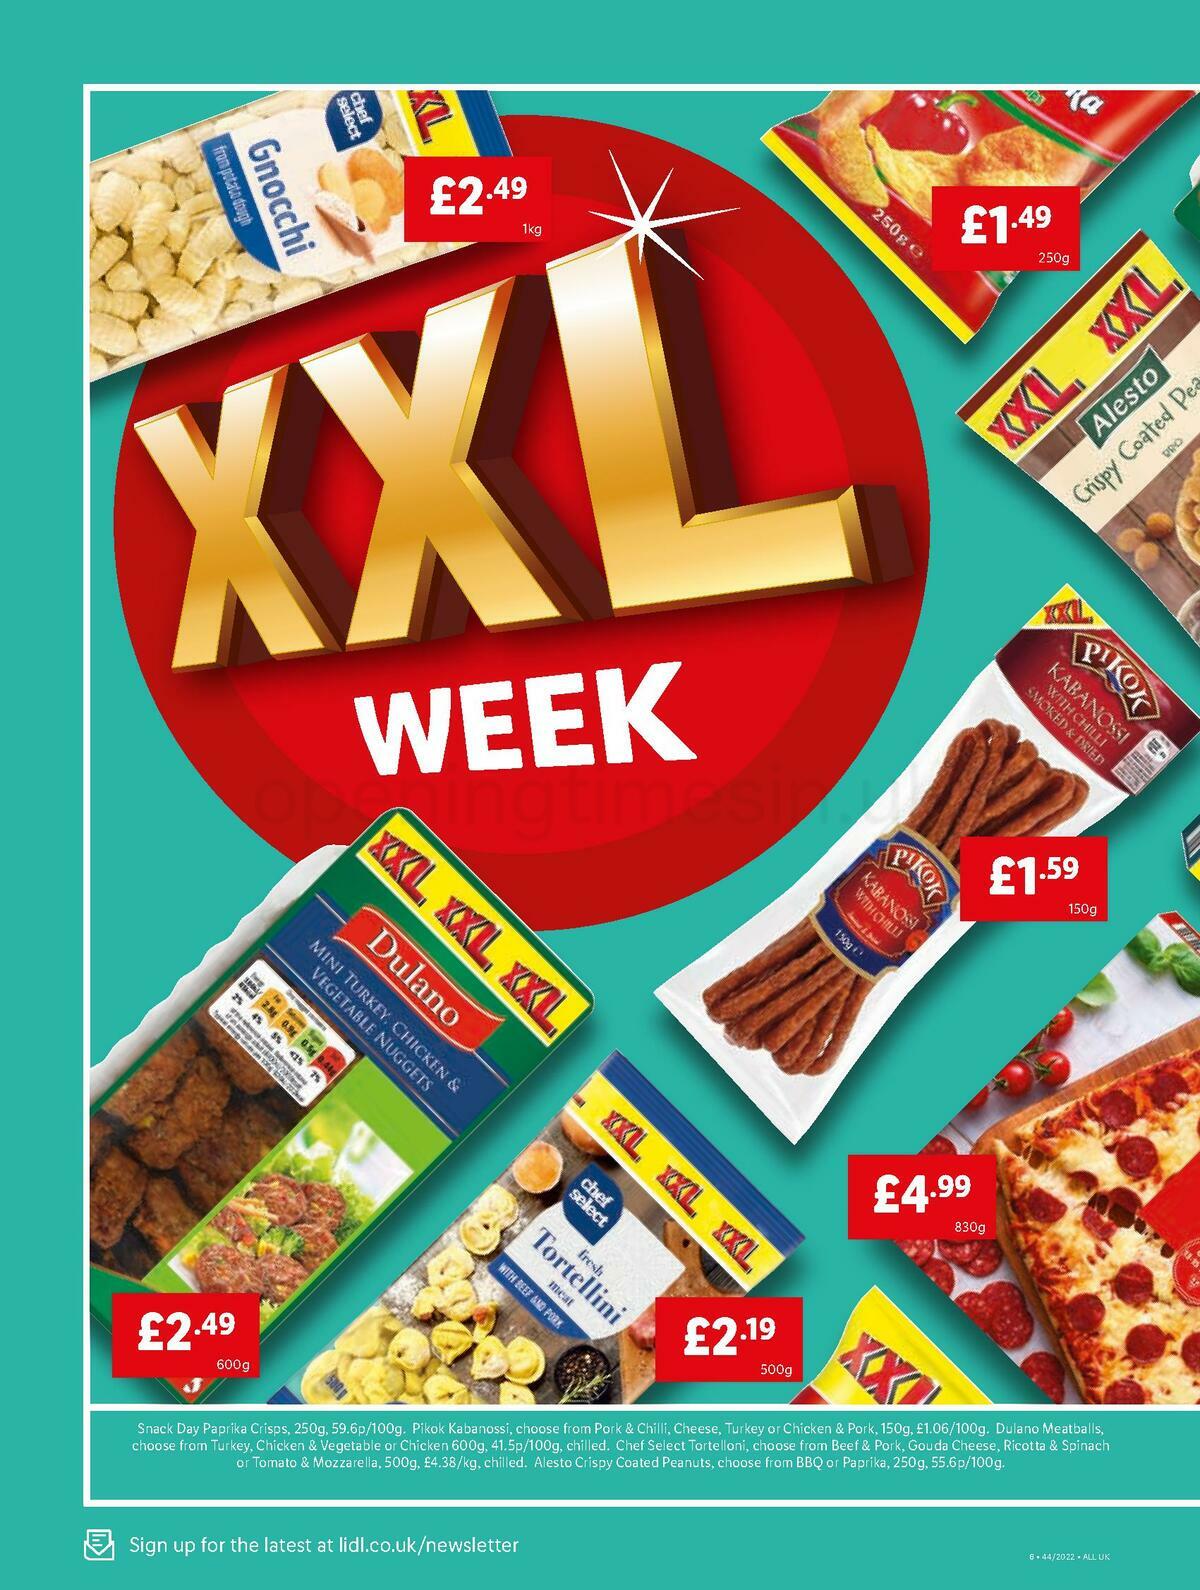 LIDL Offers from 3 November